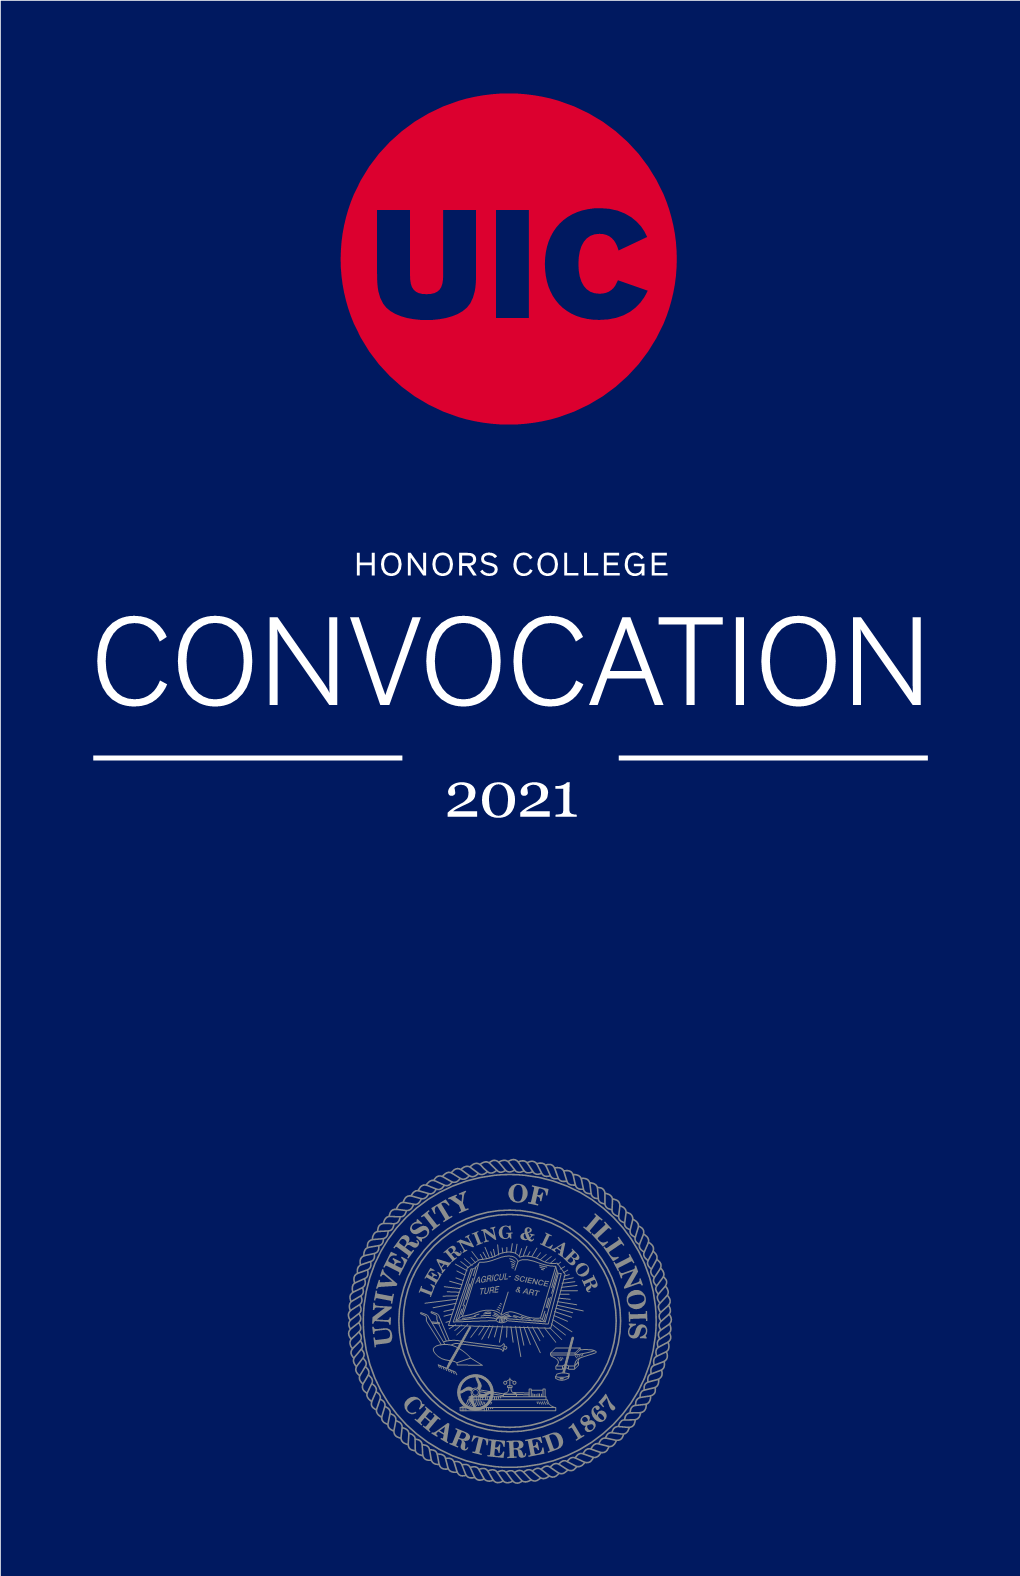 P2002358 Honors College 2020 Covocation Program Cover.Indd